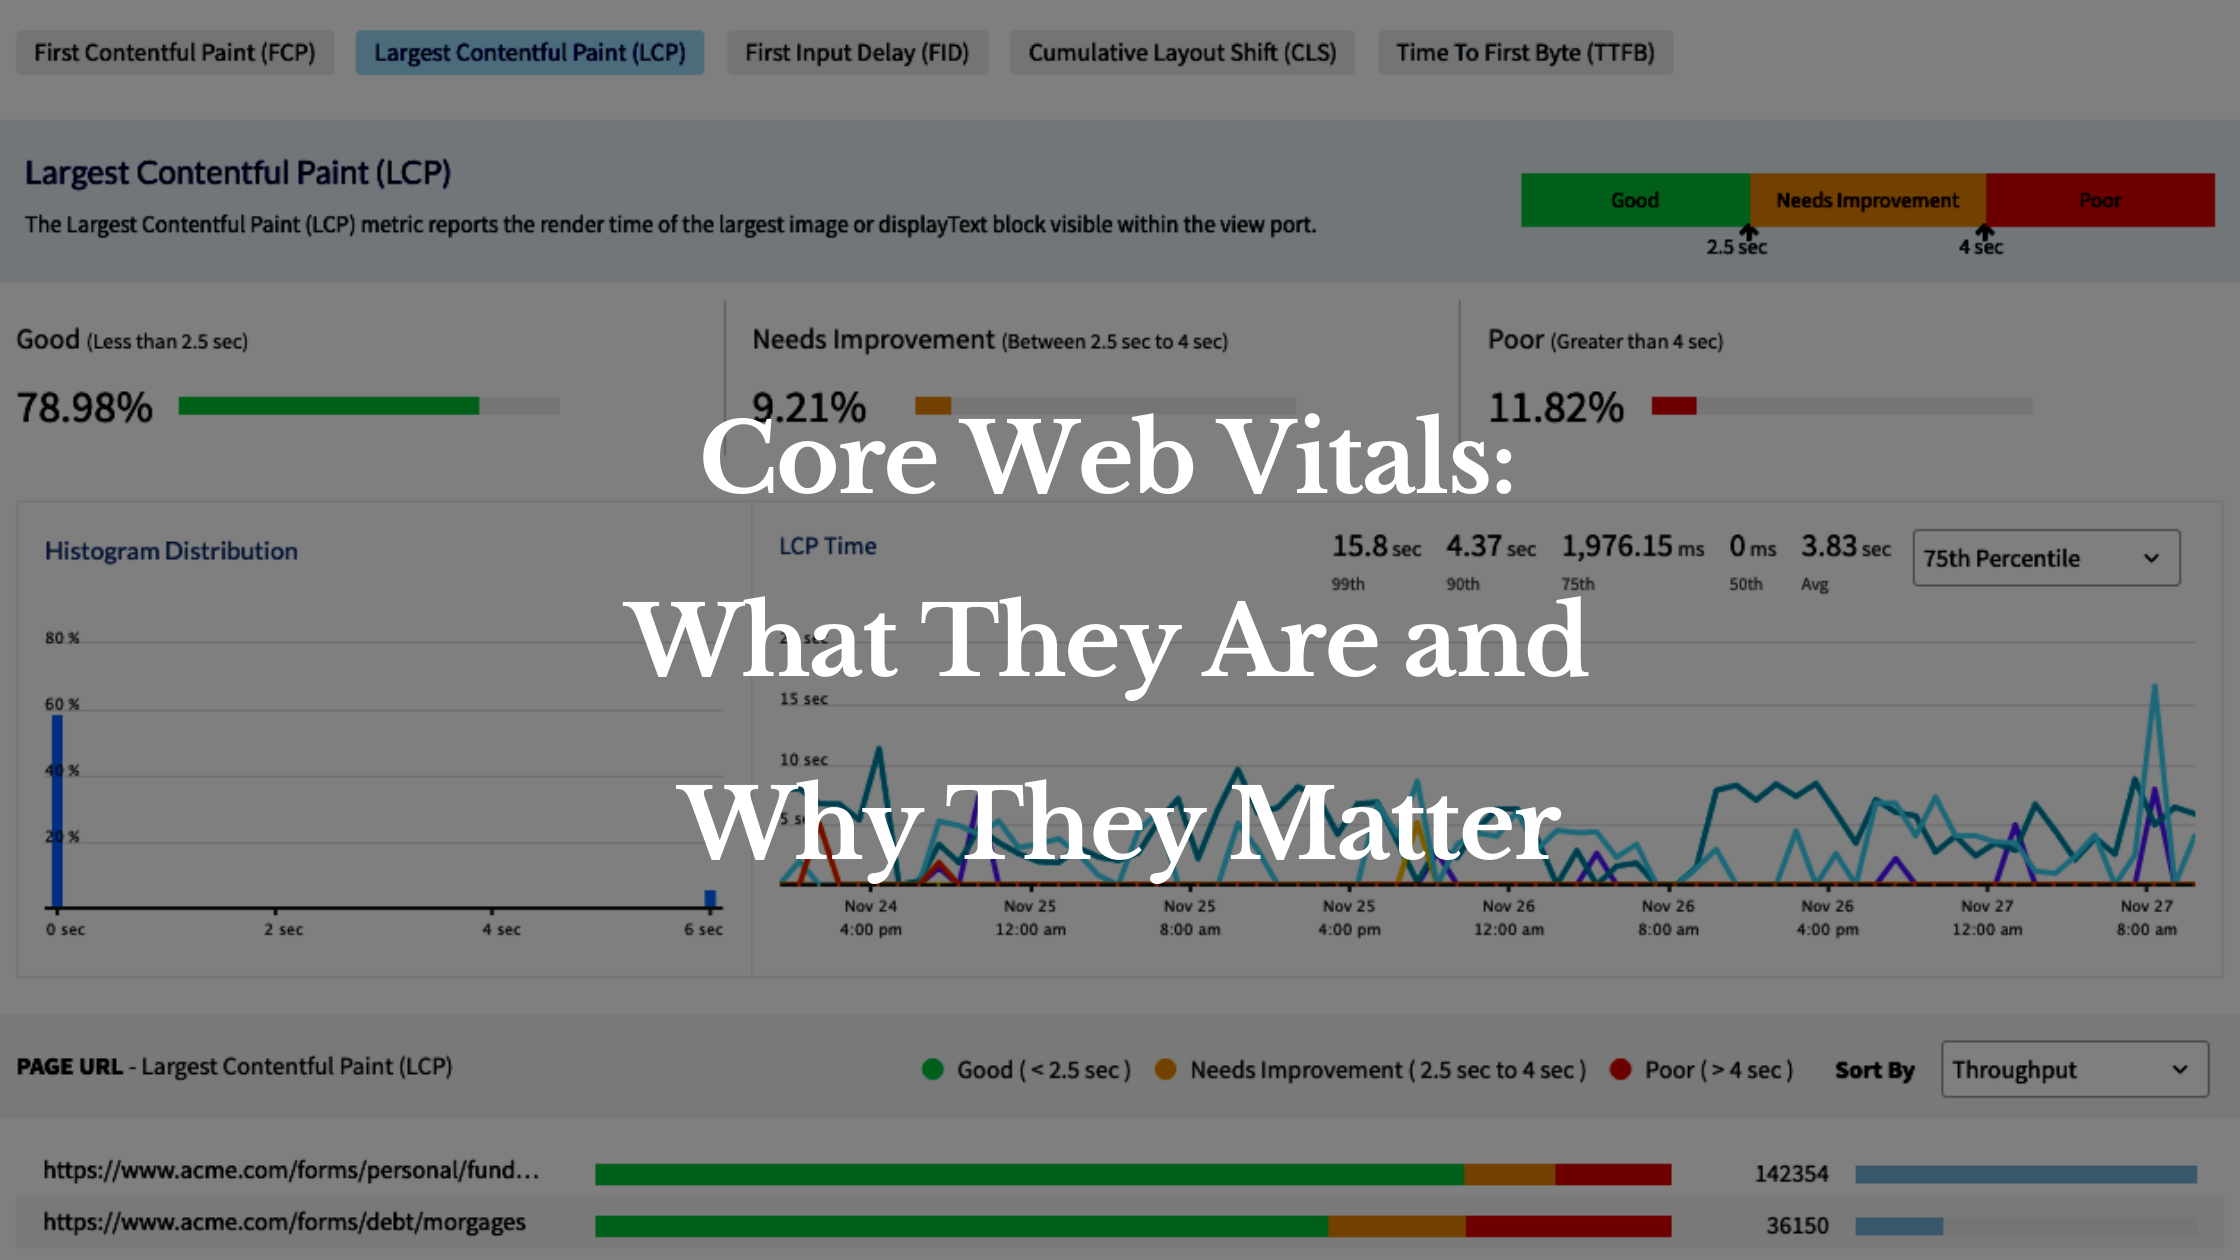 Core Web Vitals: What They Are and Why They Matter